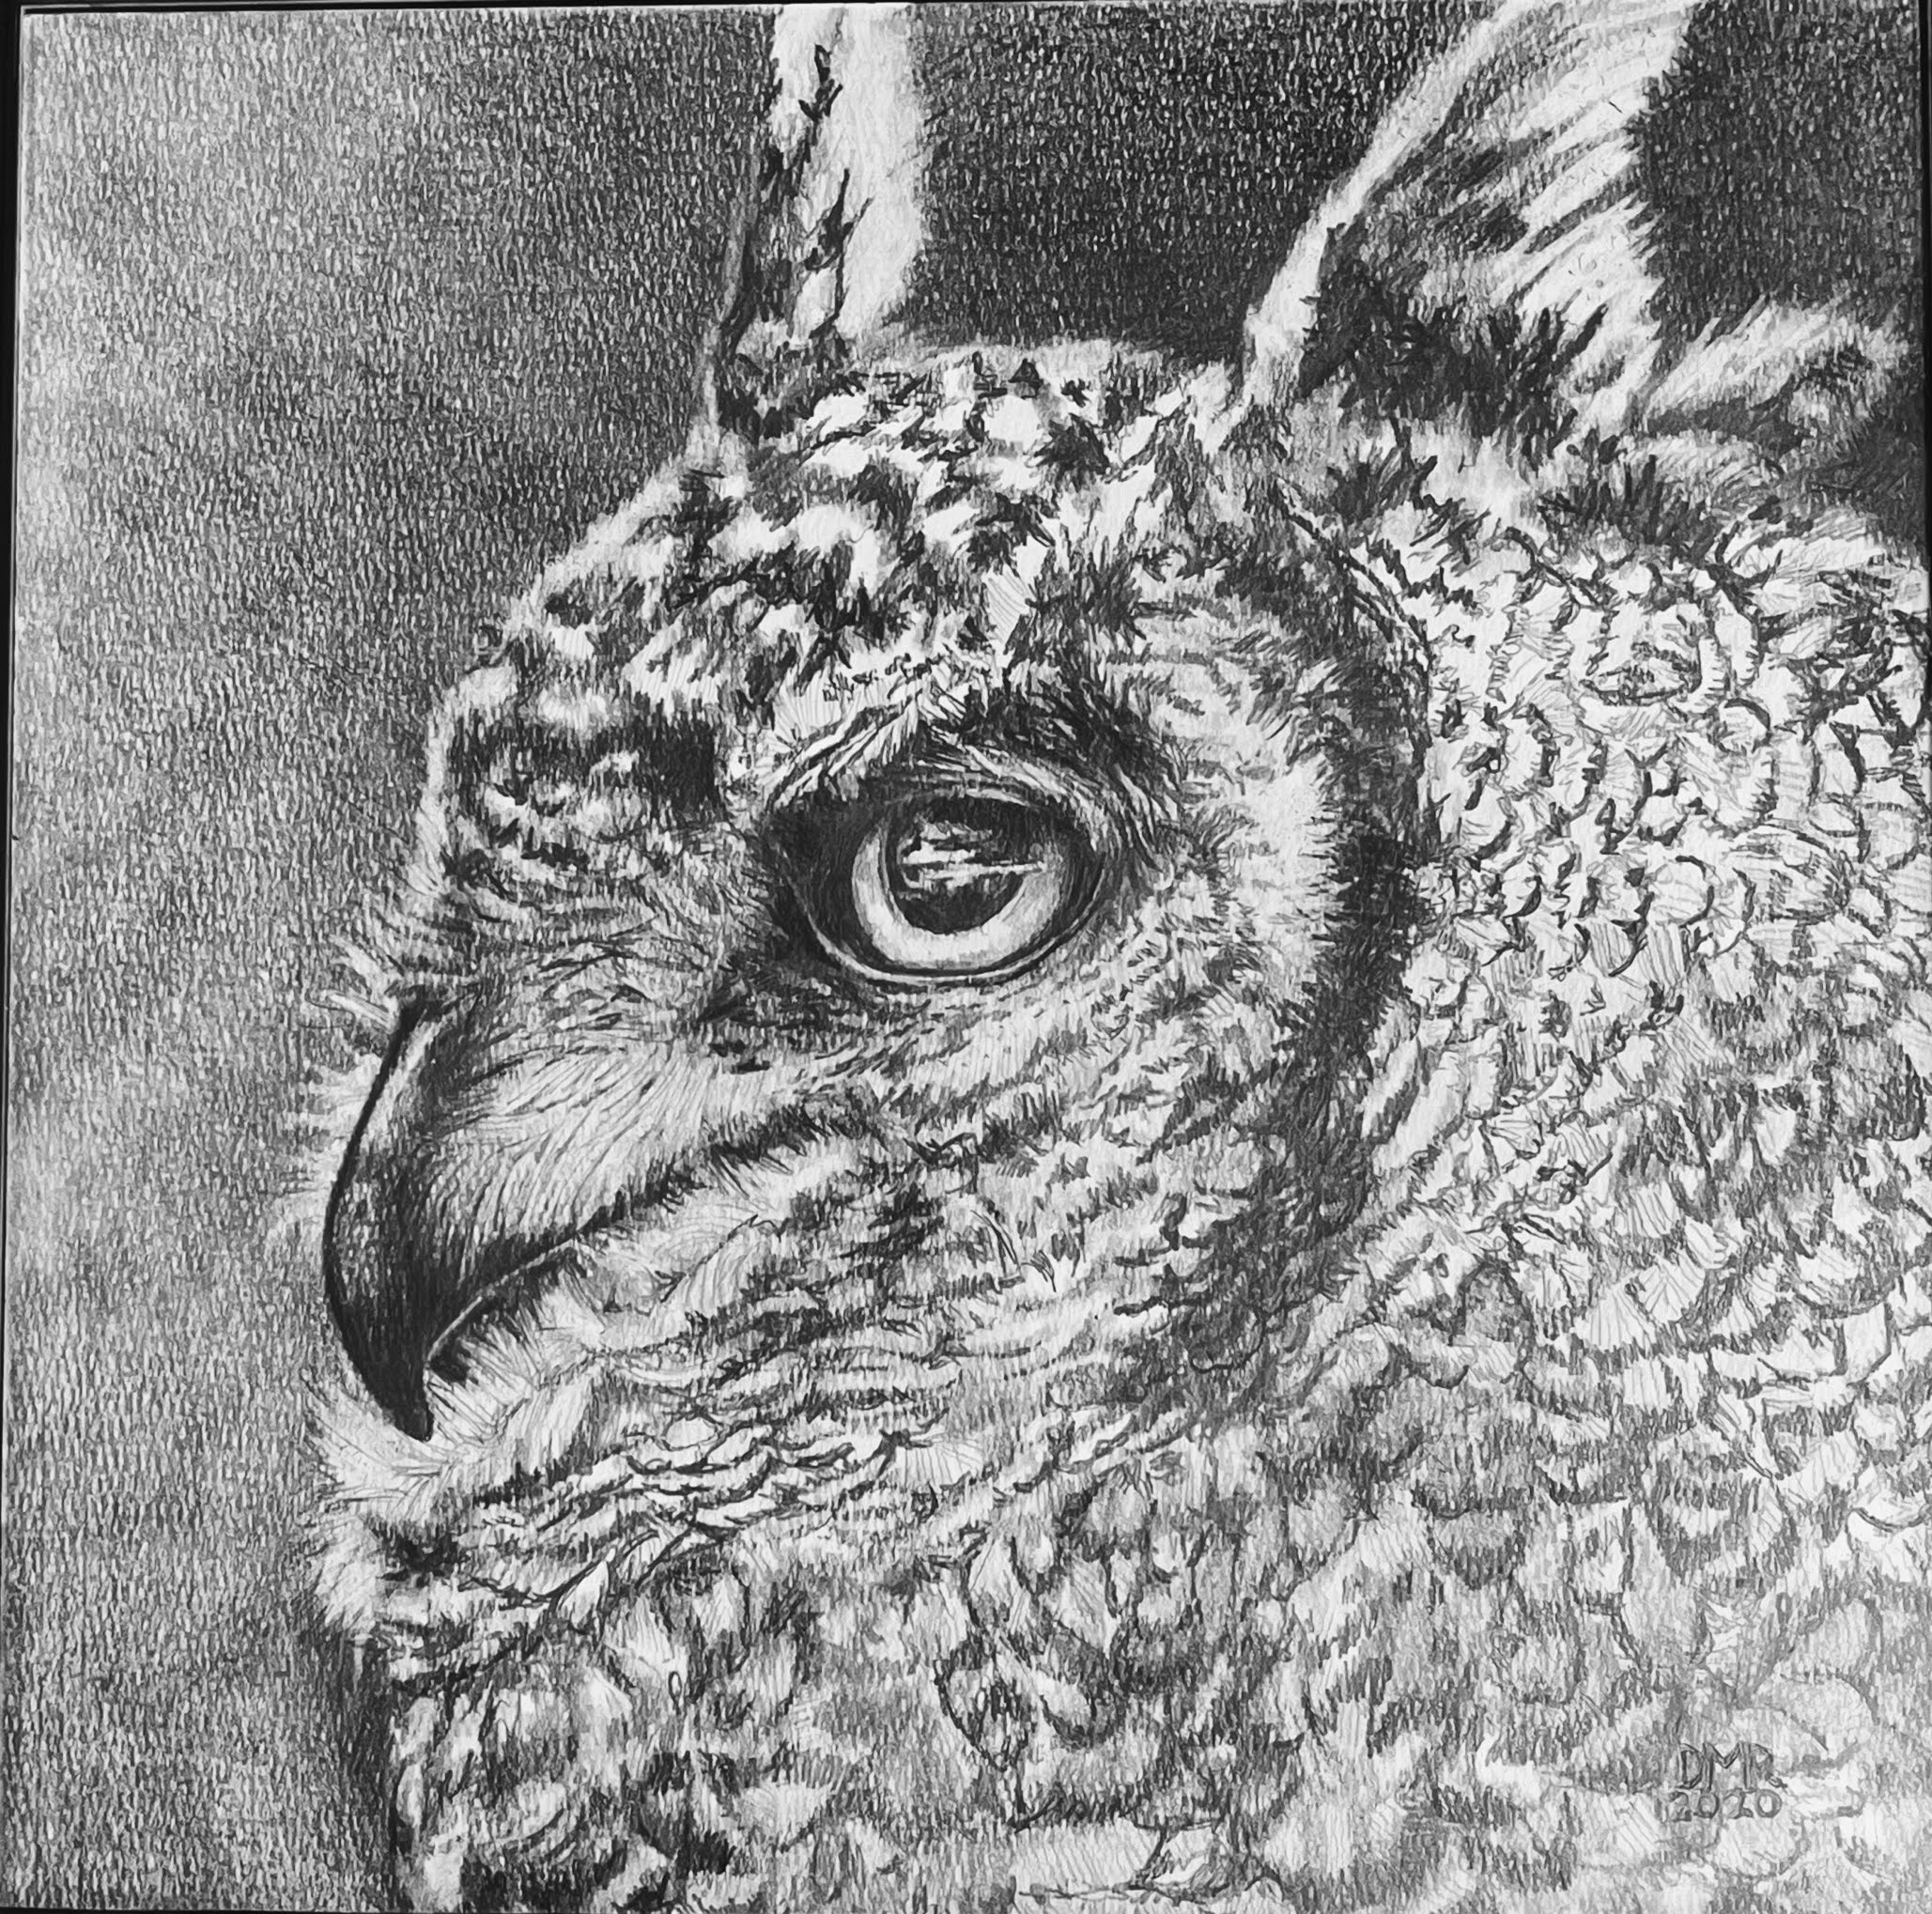 Pencil drawing of an owl by Darlene Meader Riggs